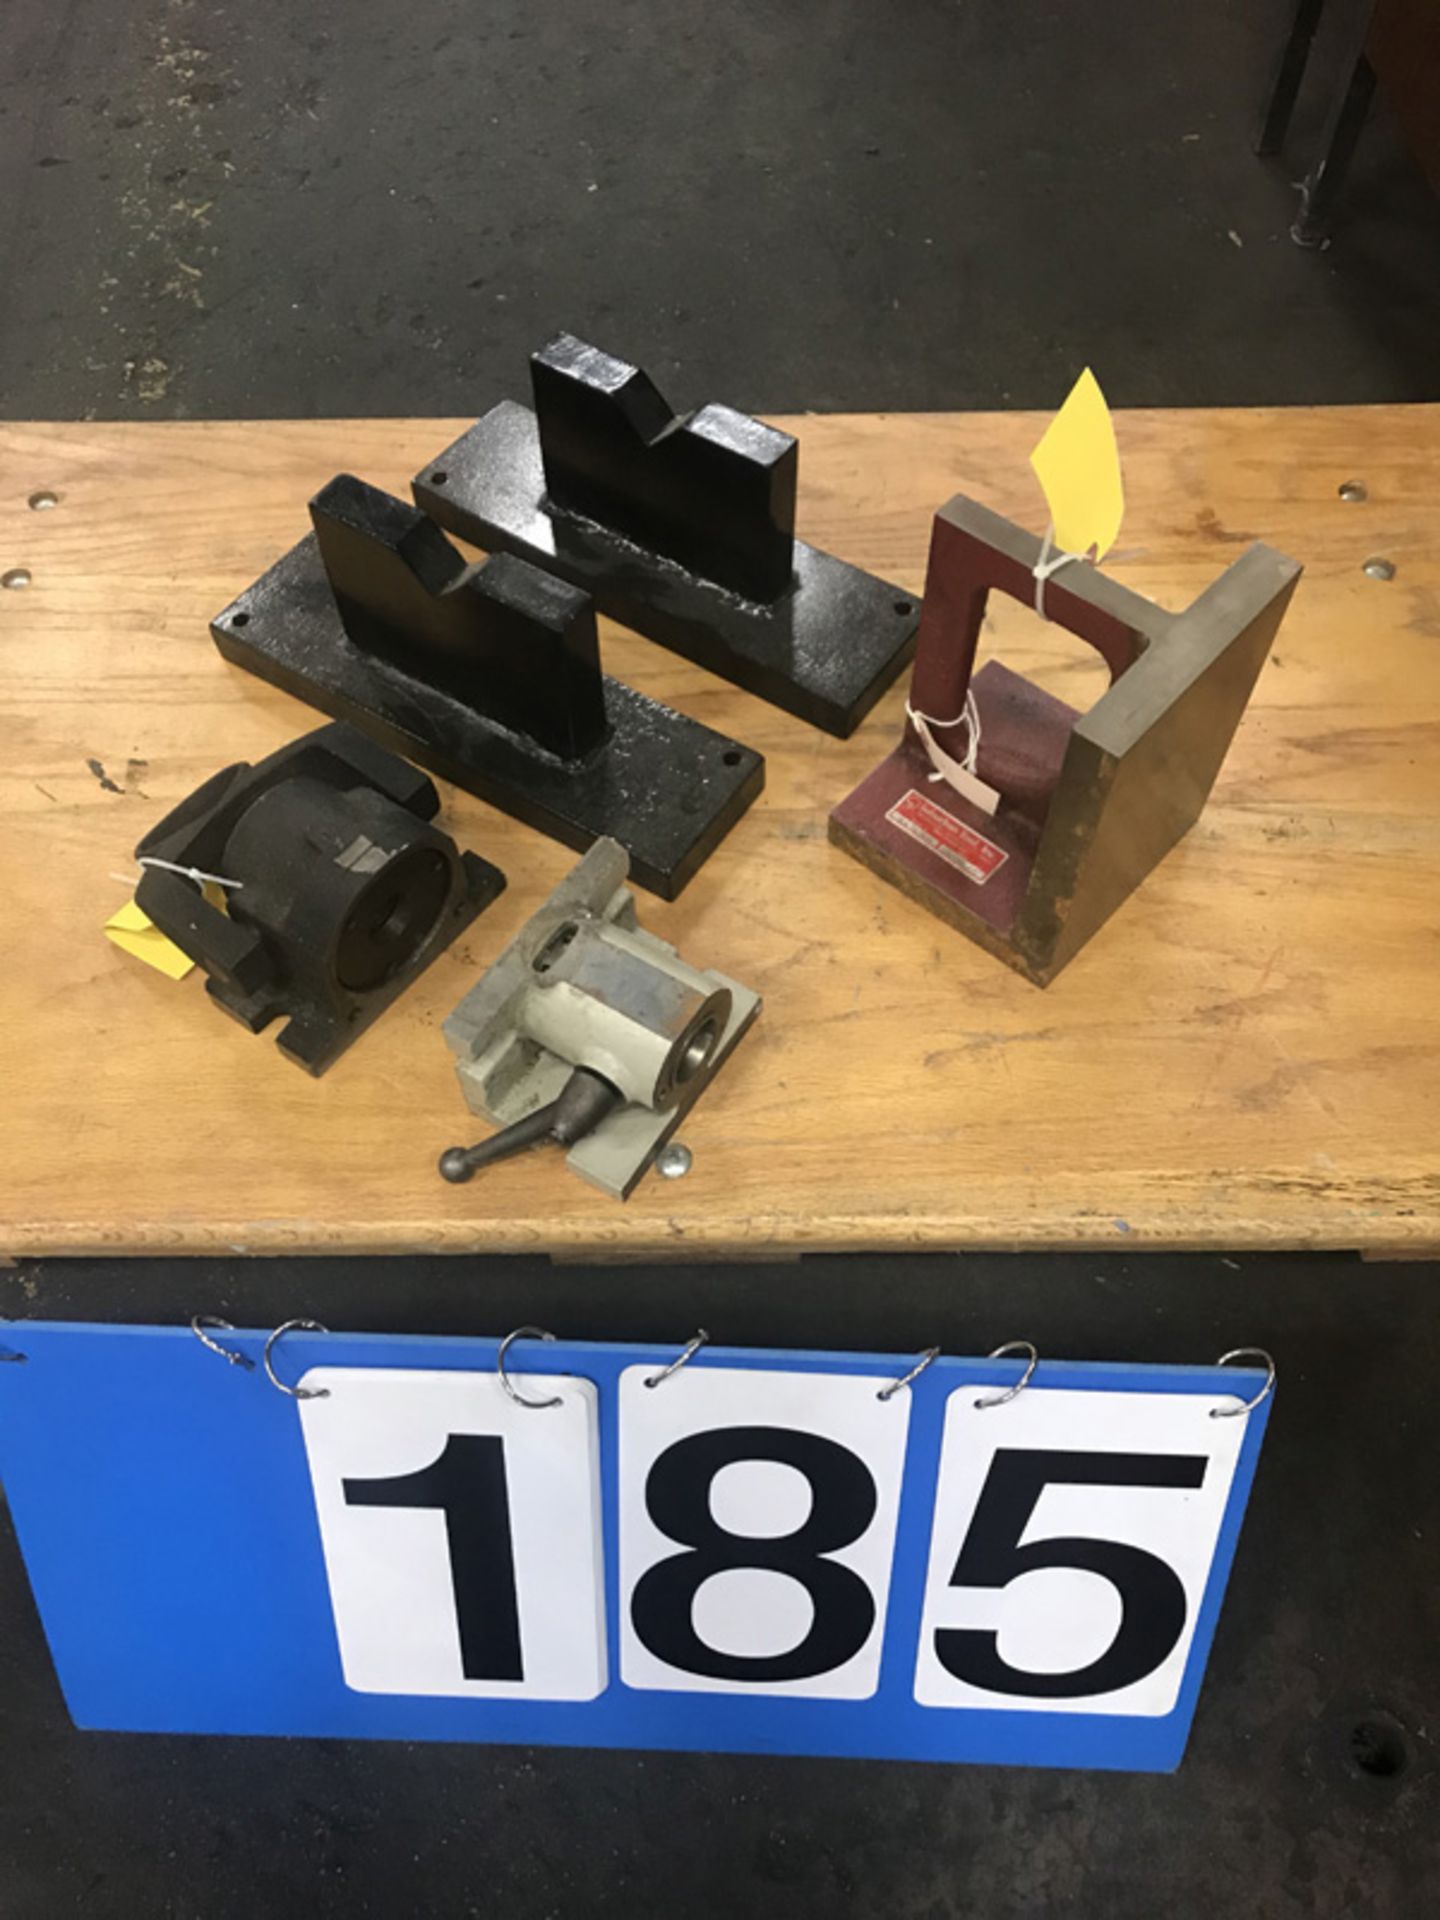 Lot 2 5c clamp fixtures, v block clamp fixture, 6” angle plate